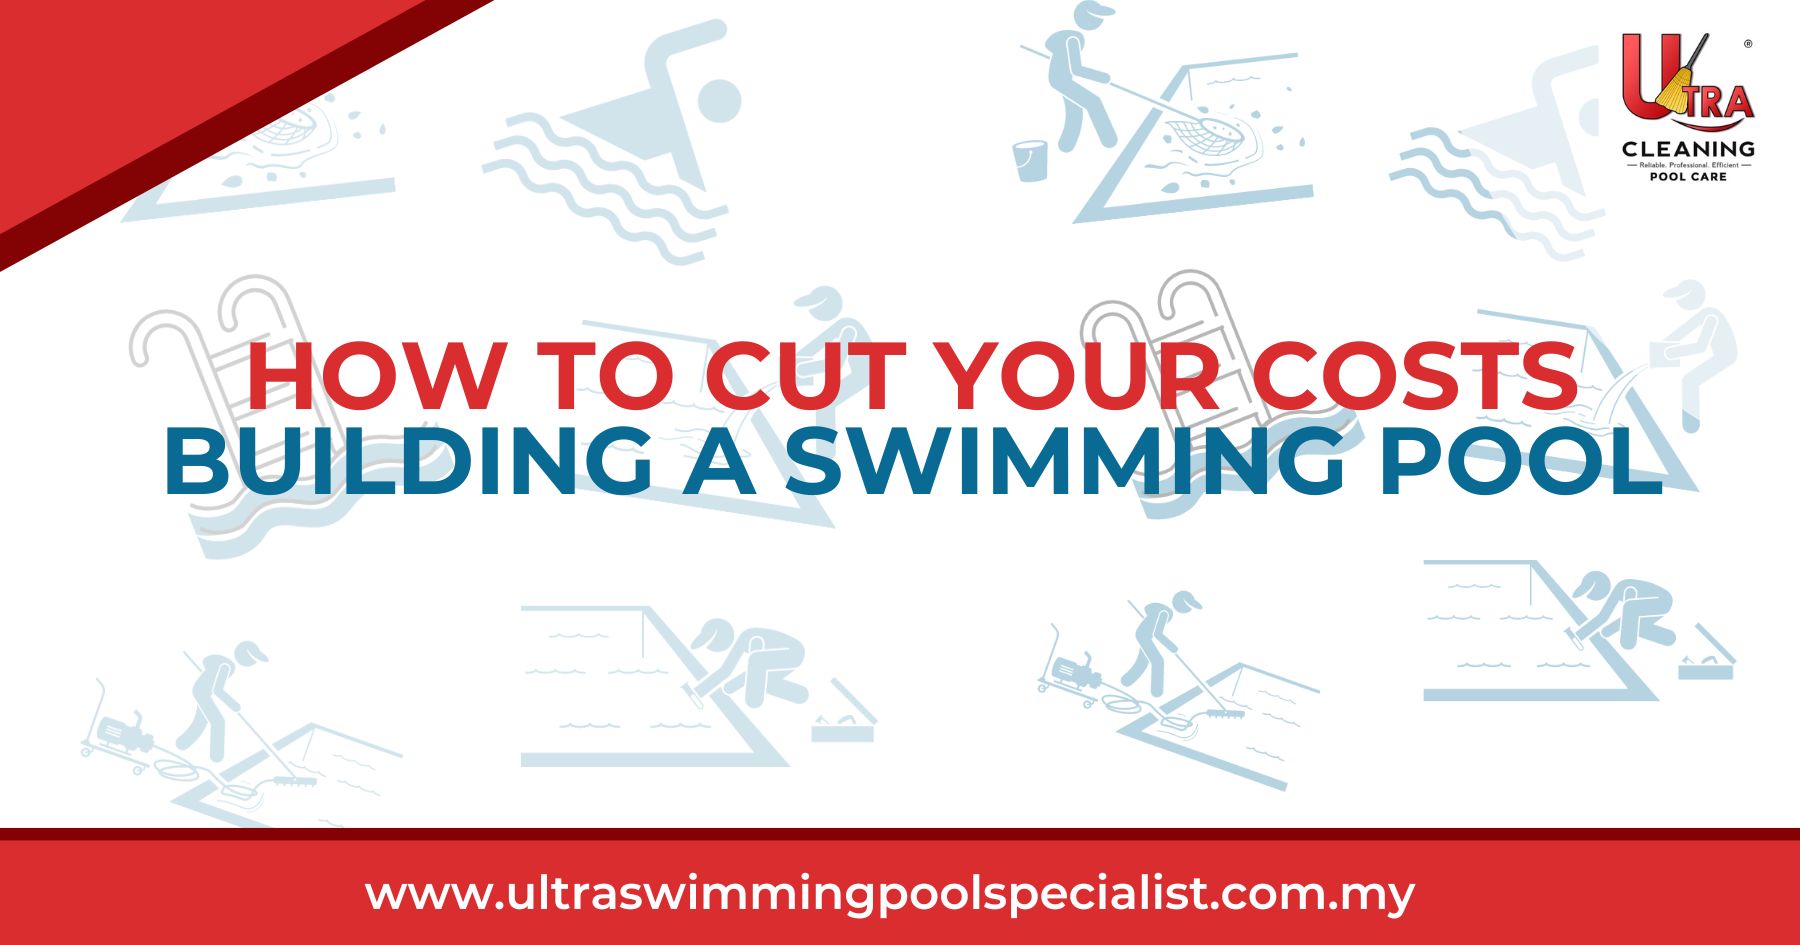 How To Cut Your Costs Building a Swimming Pool